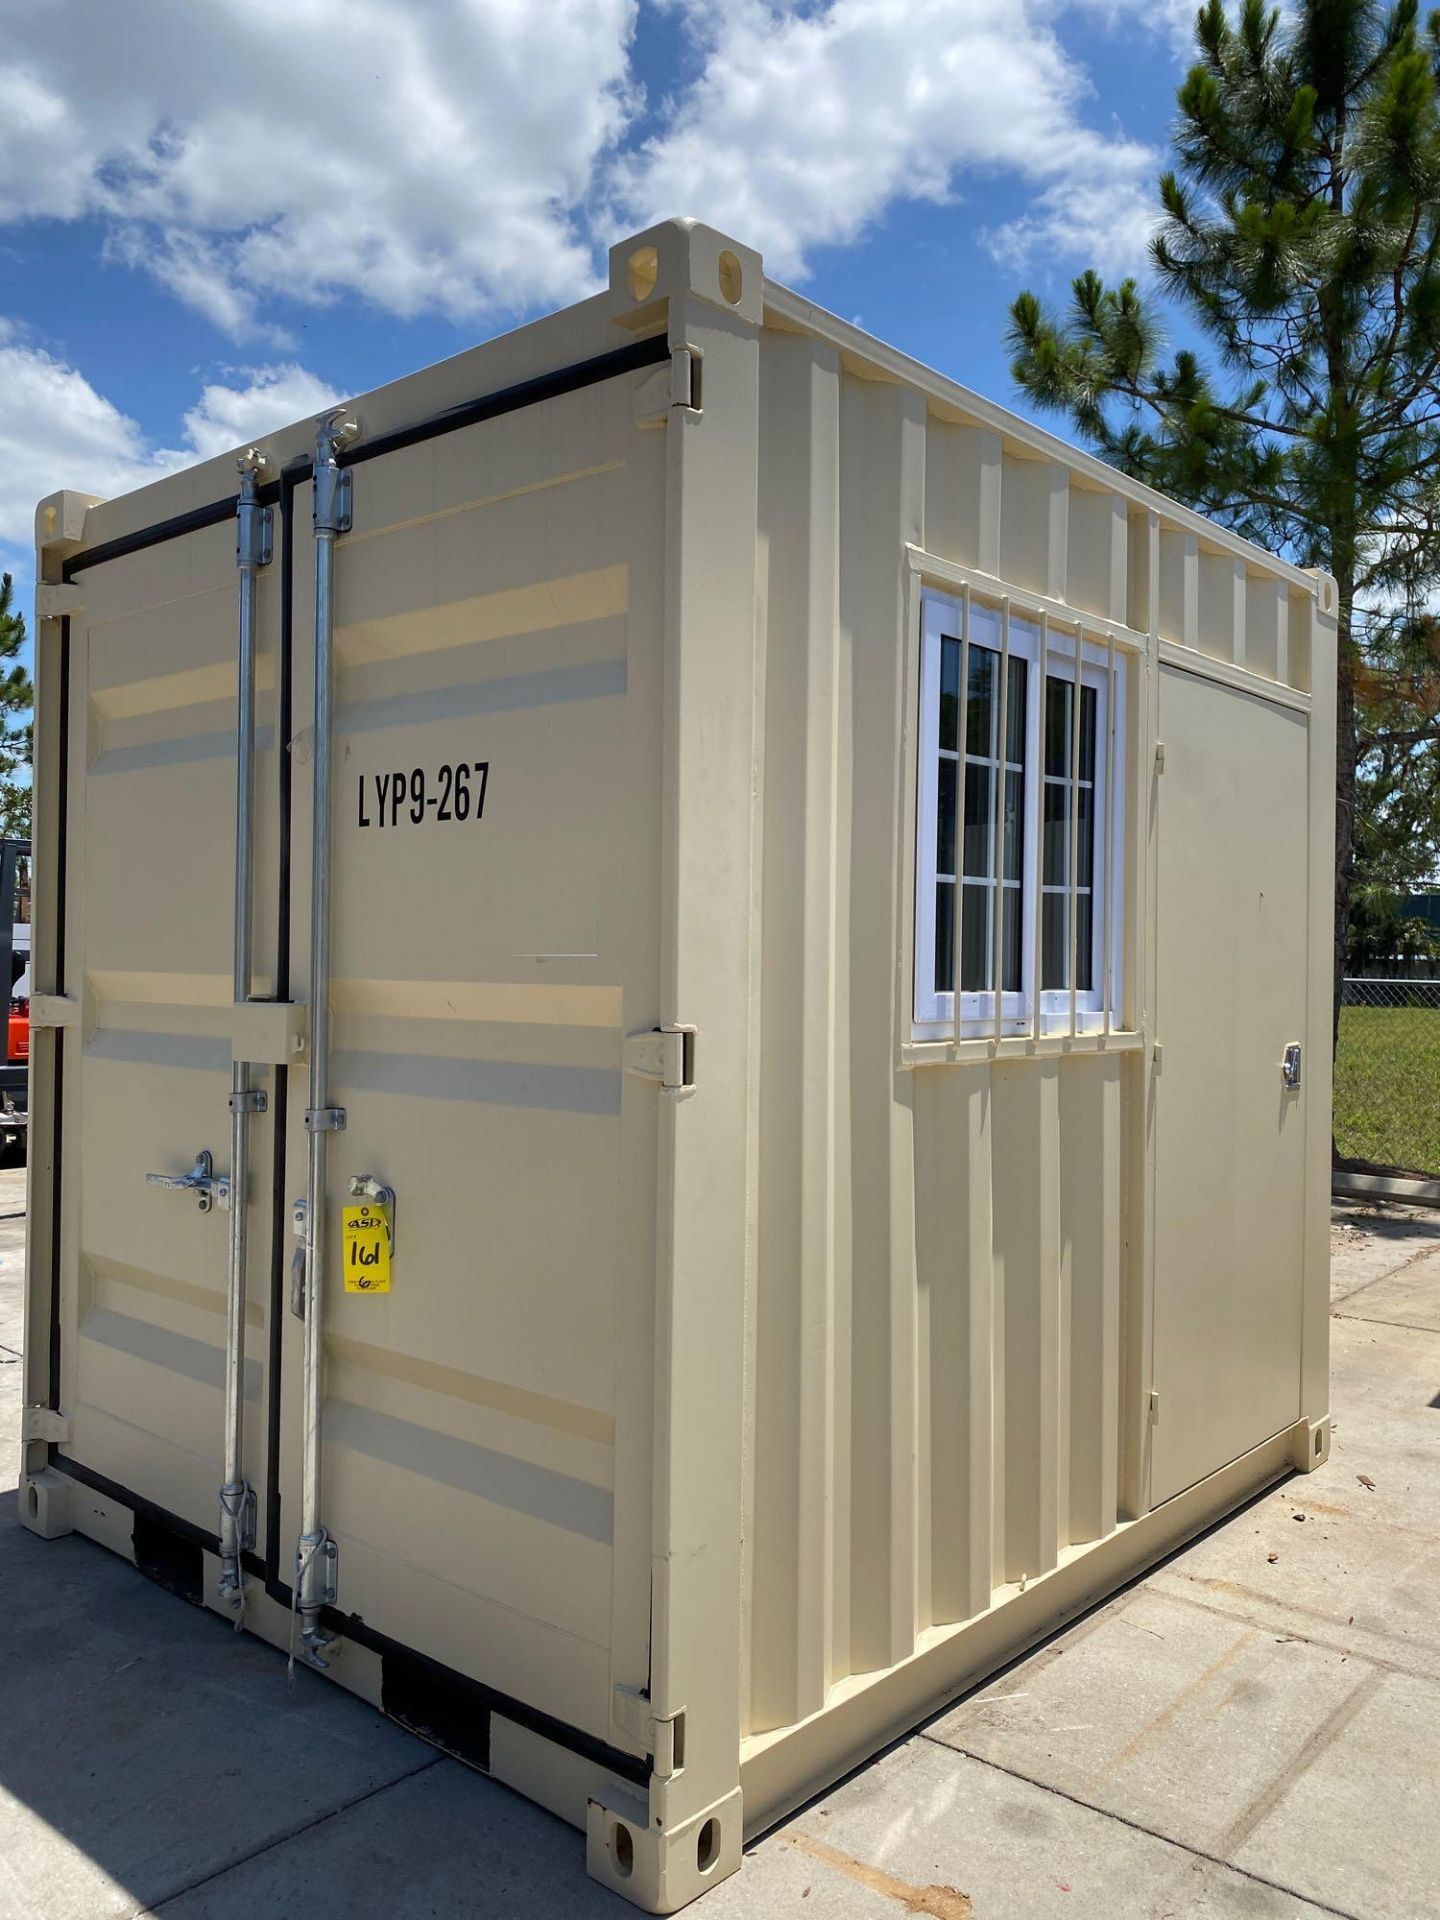 PORTABLE STORAGE CONTAINER/PORTABLE OFFICE, 6 1/2 x 9' x 8'T - Image 2 of 7